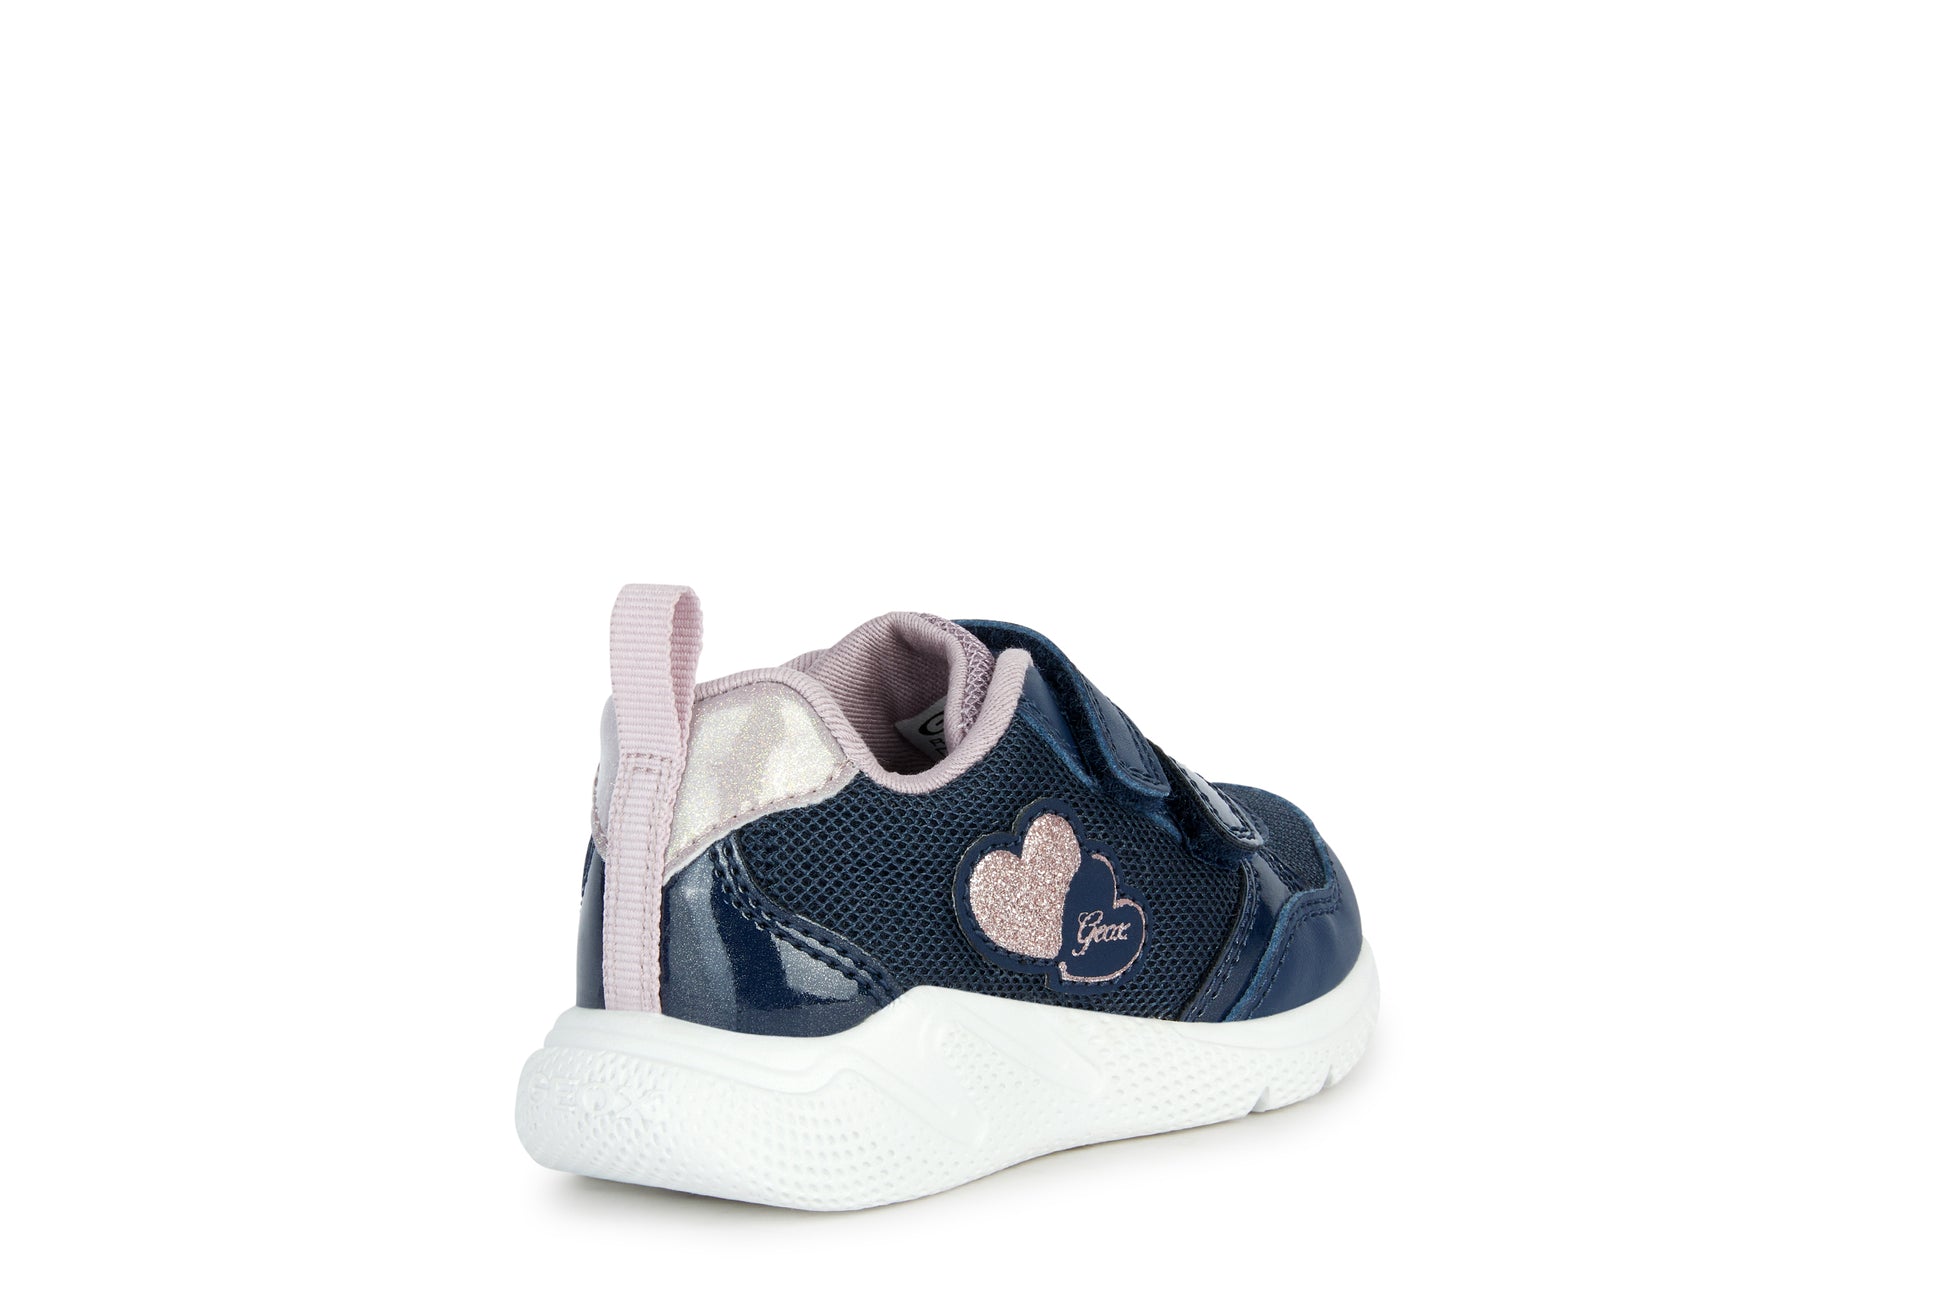 A girls trainer by Geox, style Sprintye, in navy and rose with double velcro fastening. Rear outer side view.